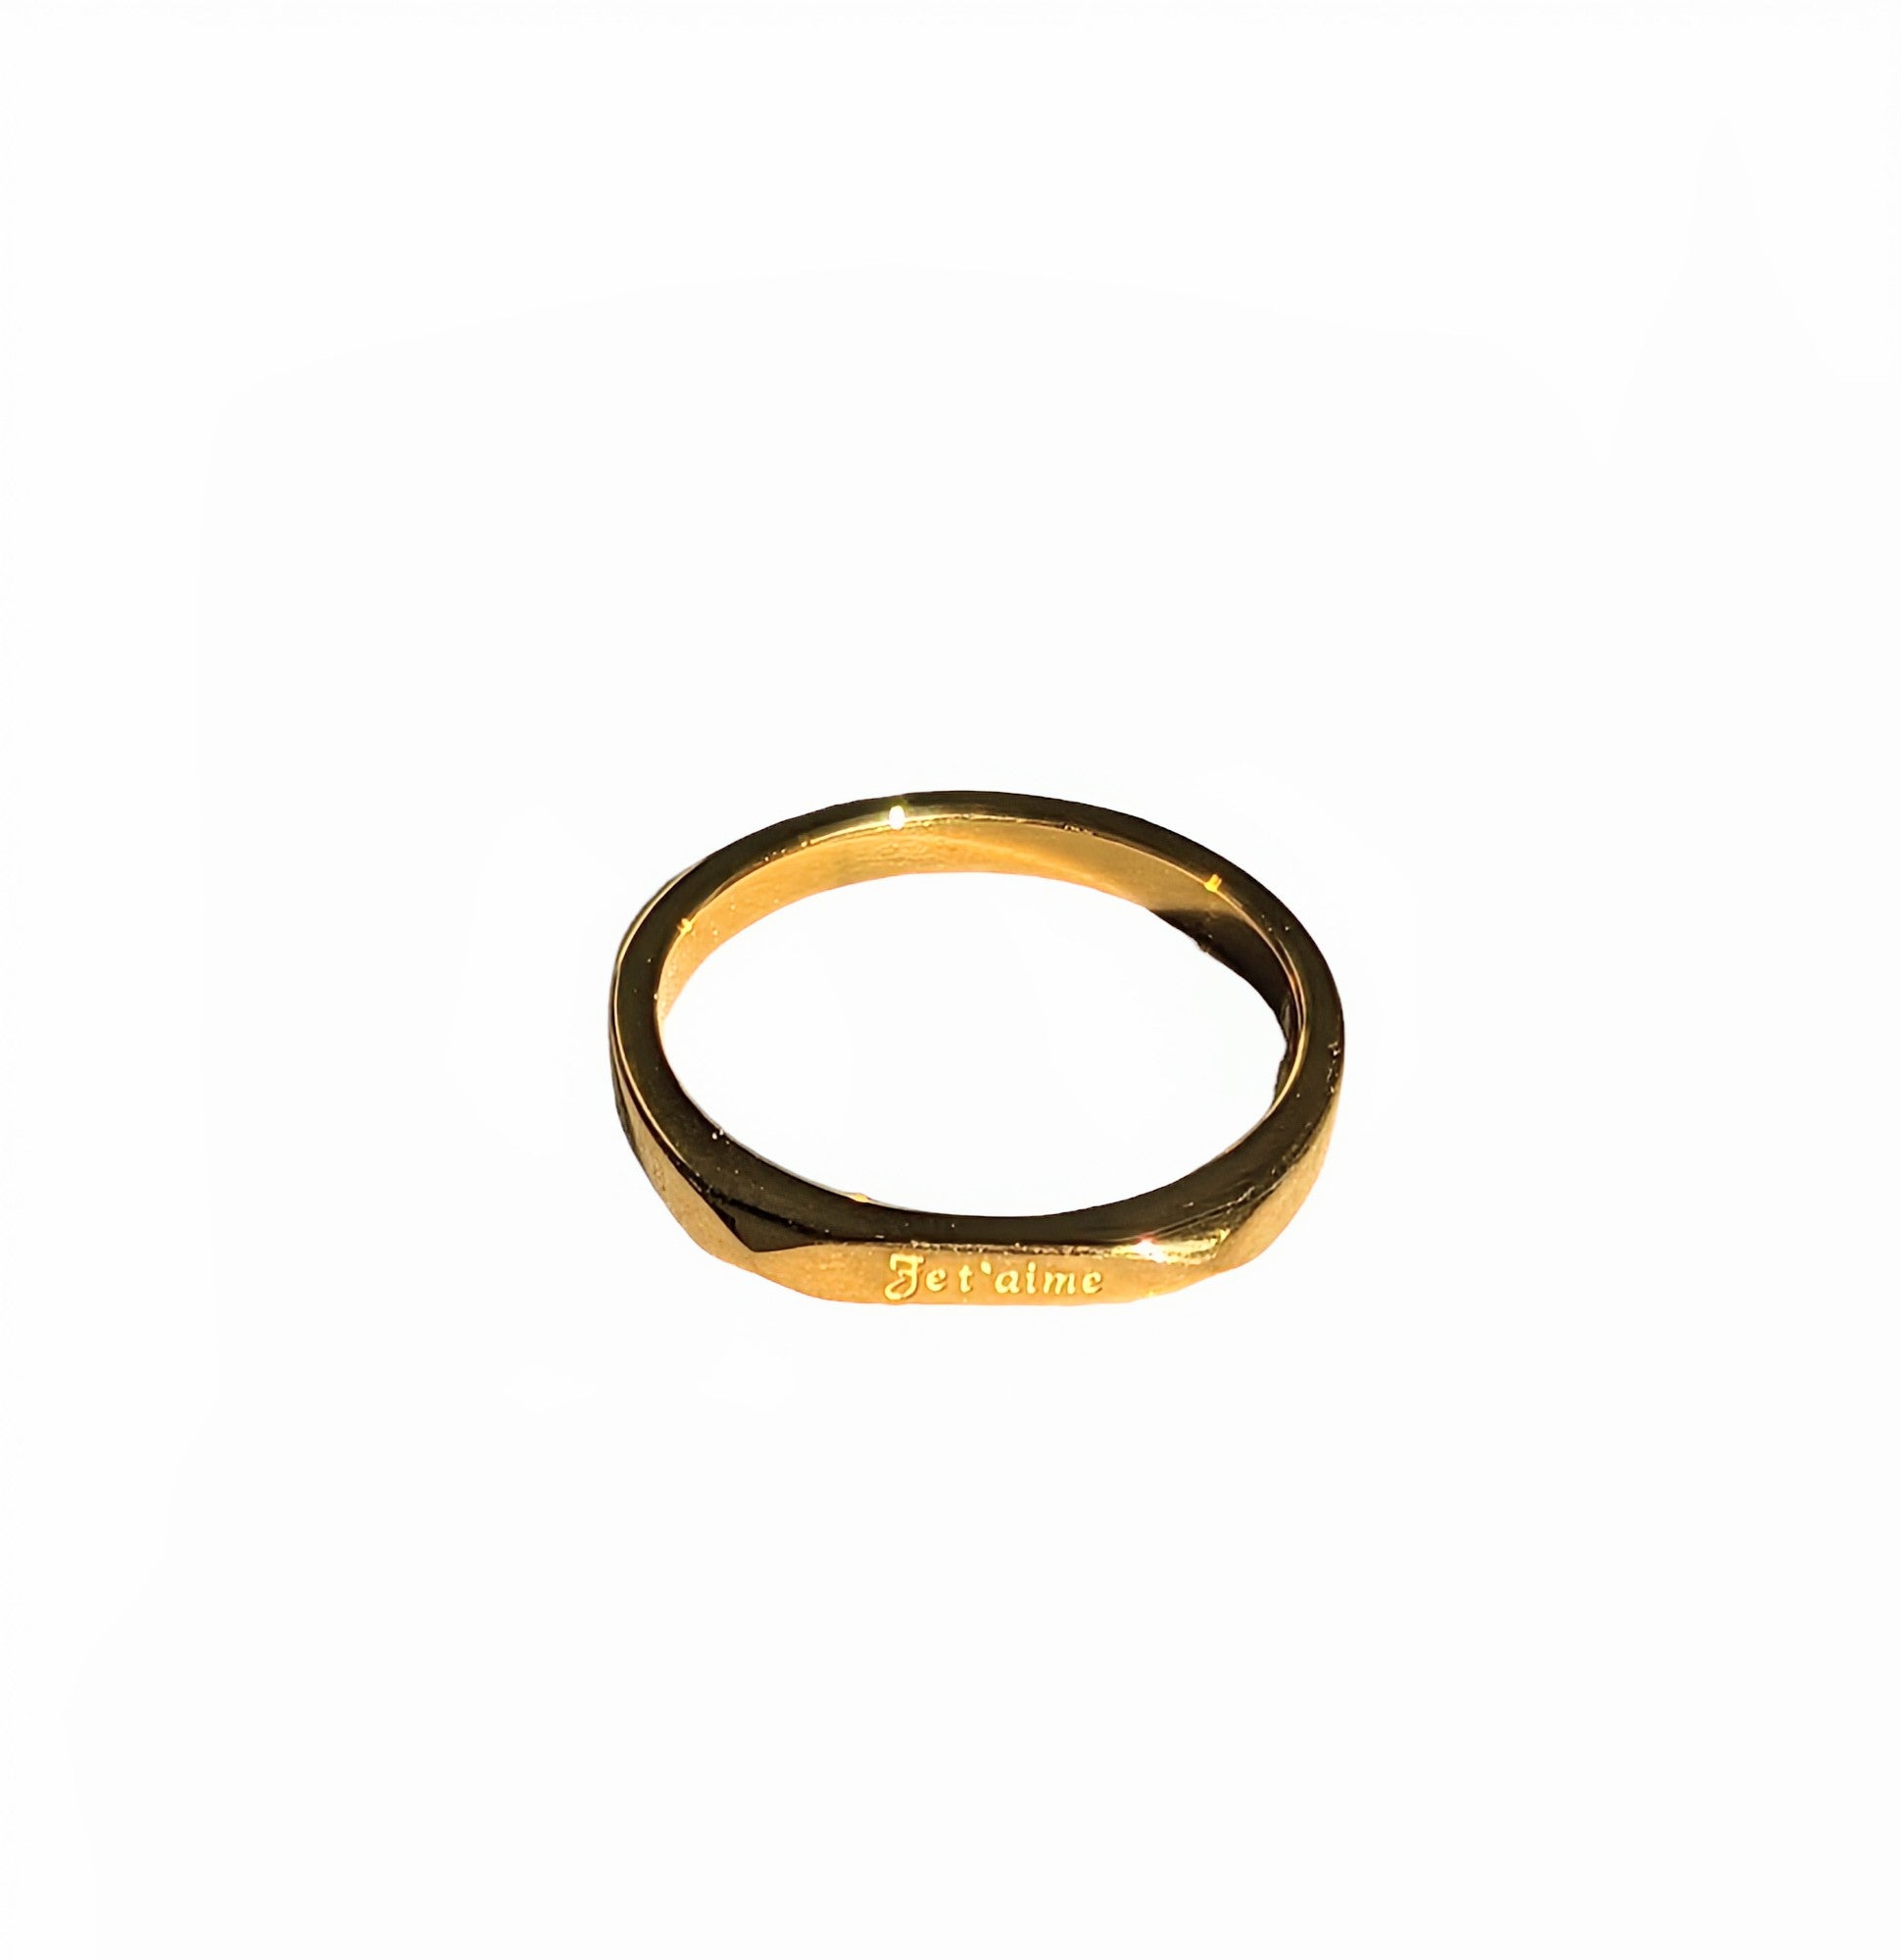 Je t'aime Engraved Gold Geometric Ring